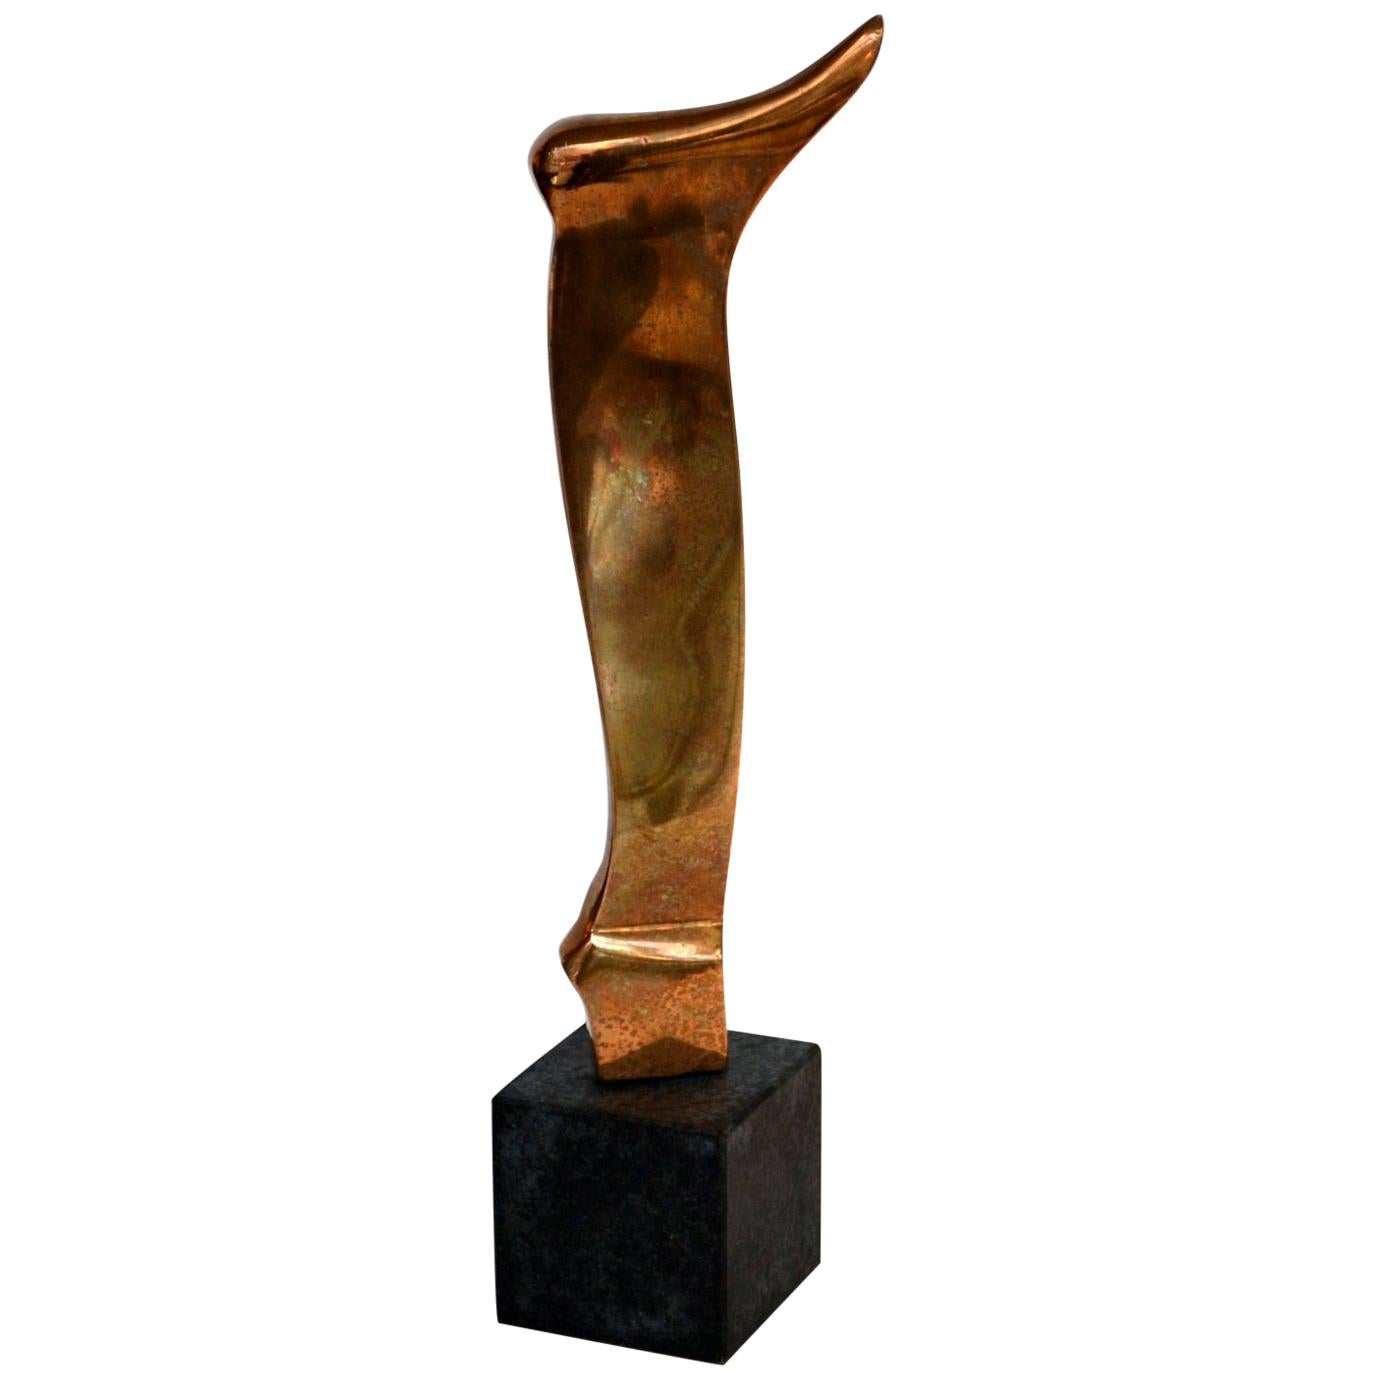 Bronze Abstract Sculpture Black Plinth by Neil Willis, England, 1970s